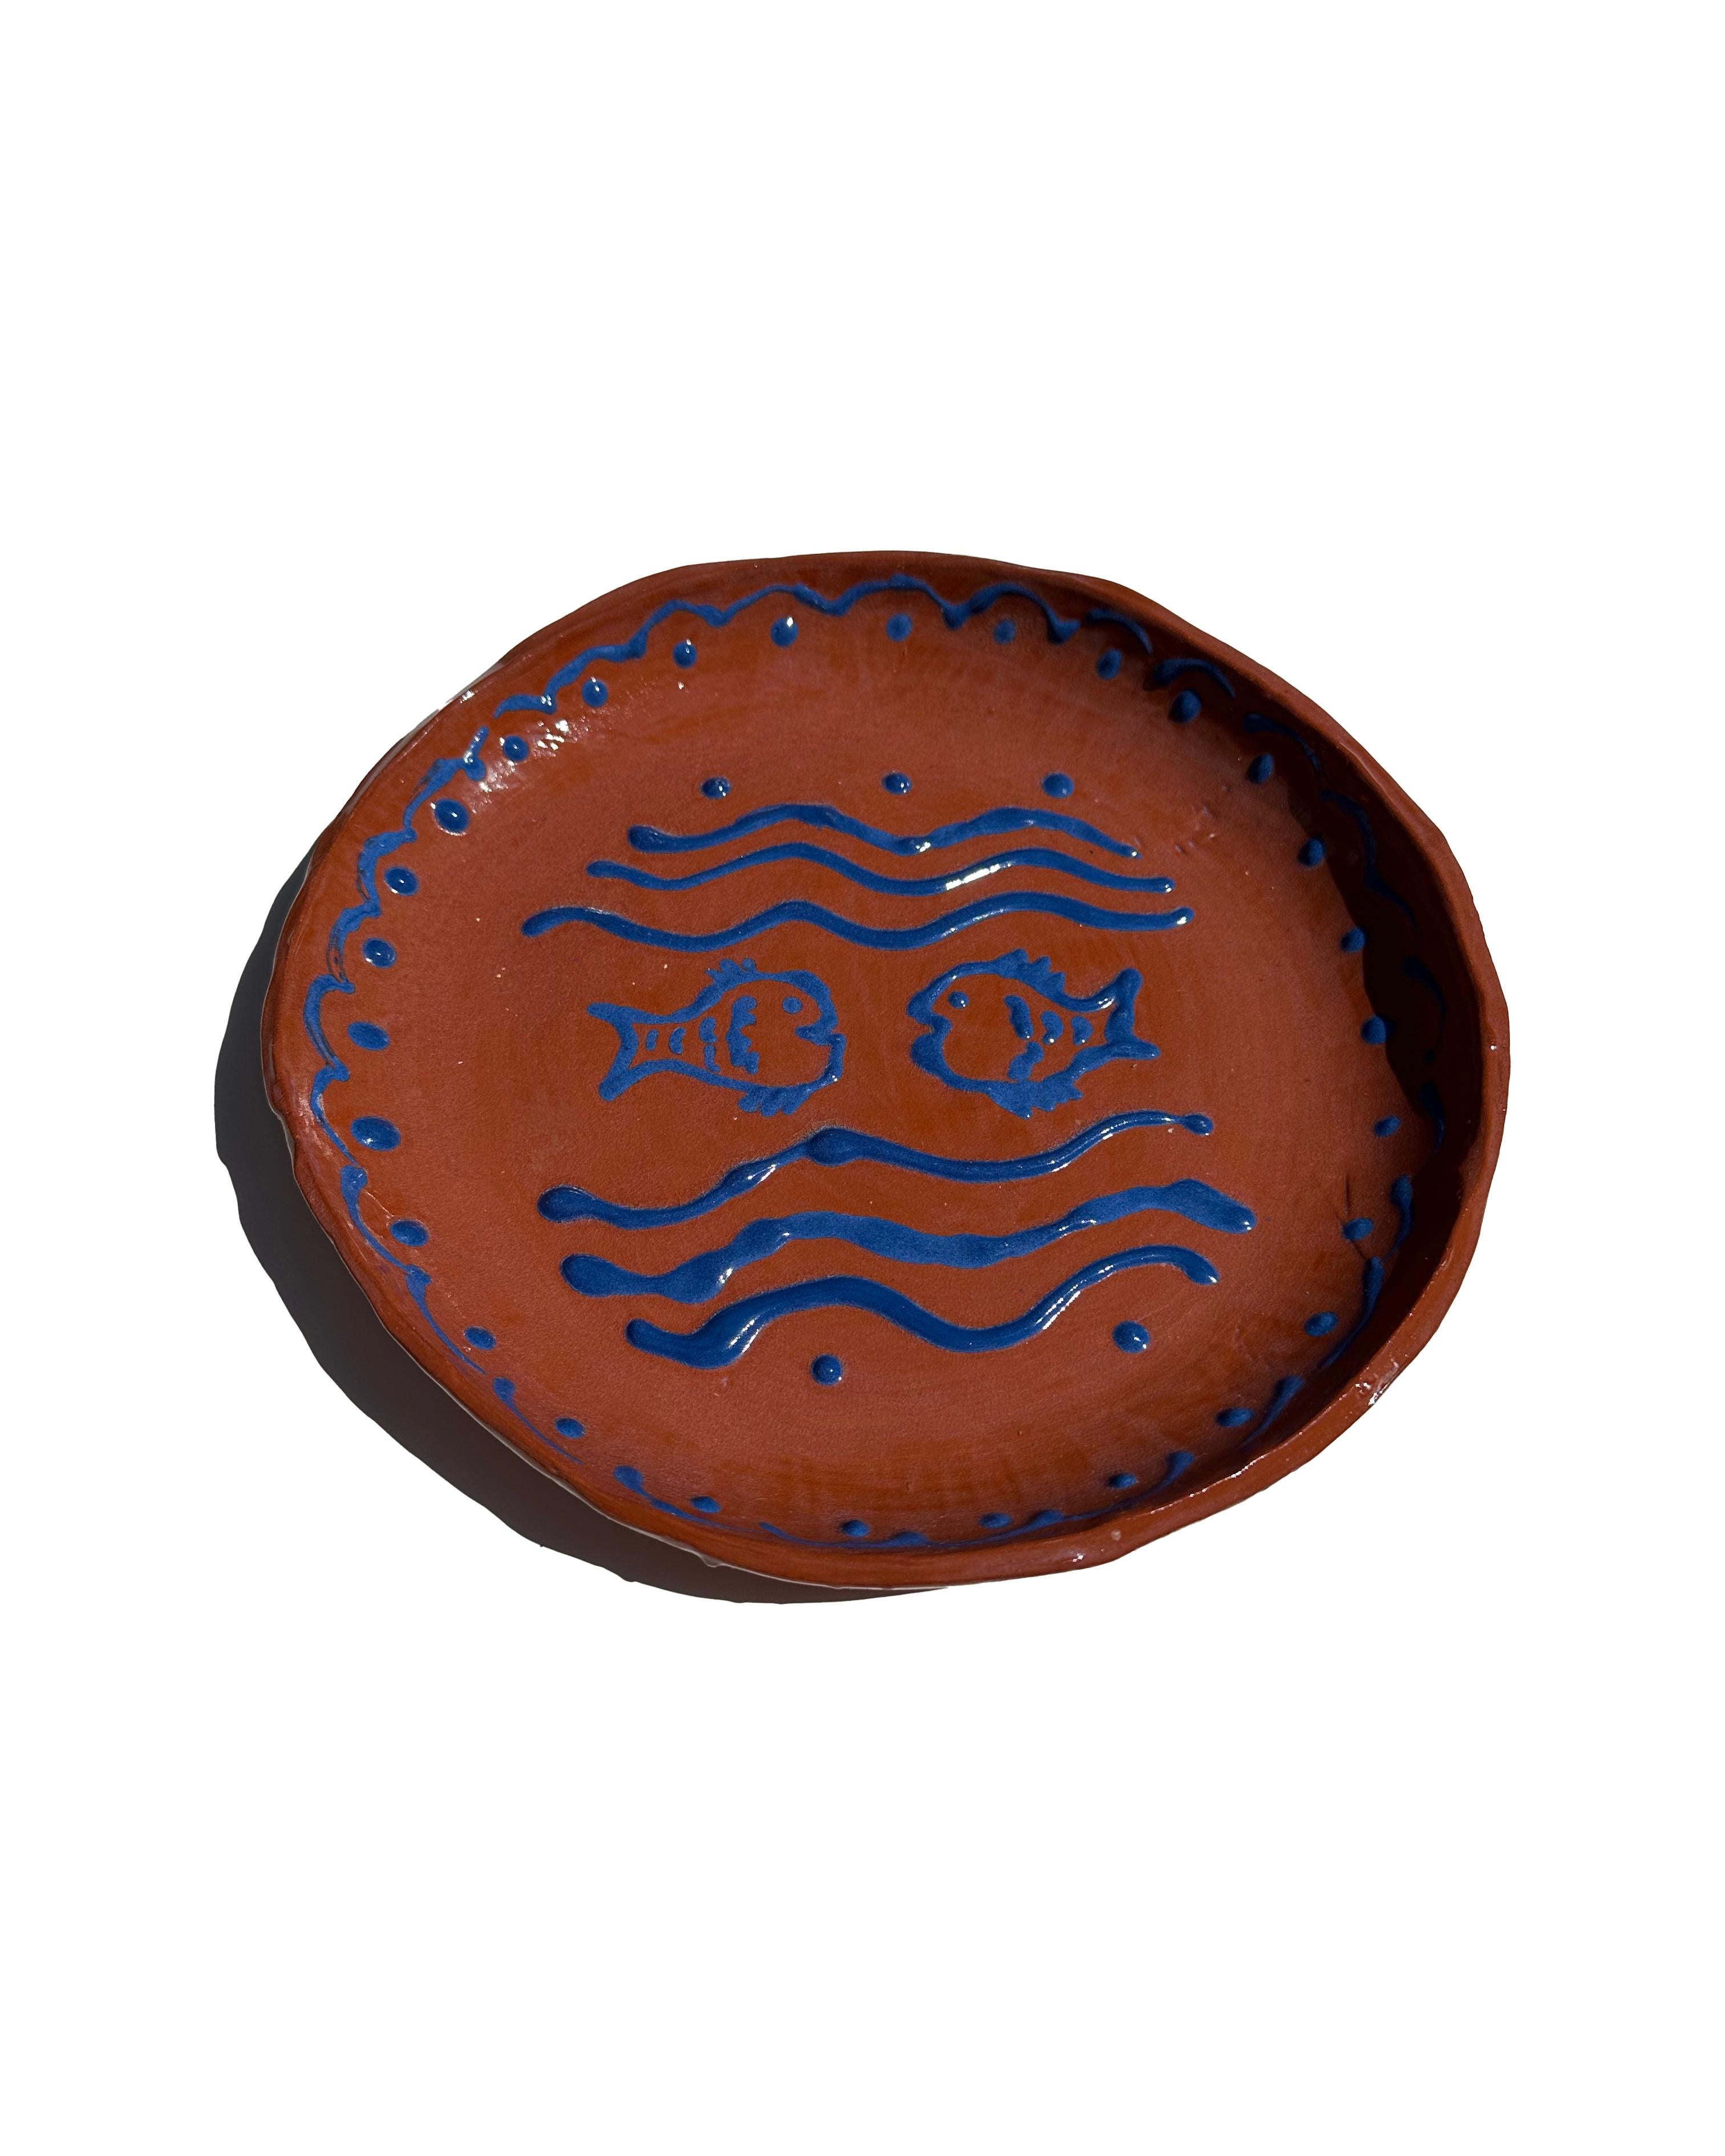 Capture the essence of European summer in your dining space with this hand-painted ceramic serving plate. Boasting a rustic brown base enhanced with cobalt blue scalloped details, this piece beautifully evokes the vibrant seaside ambiance